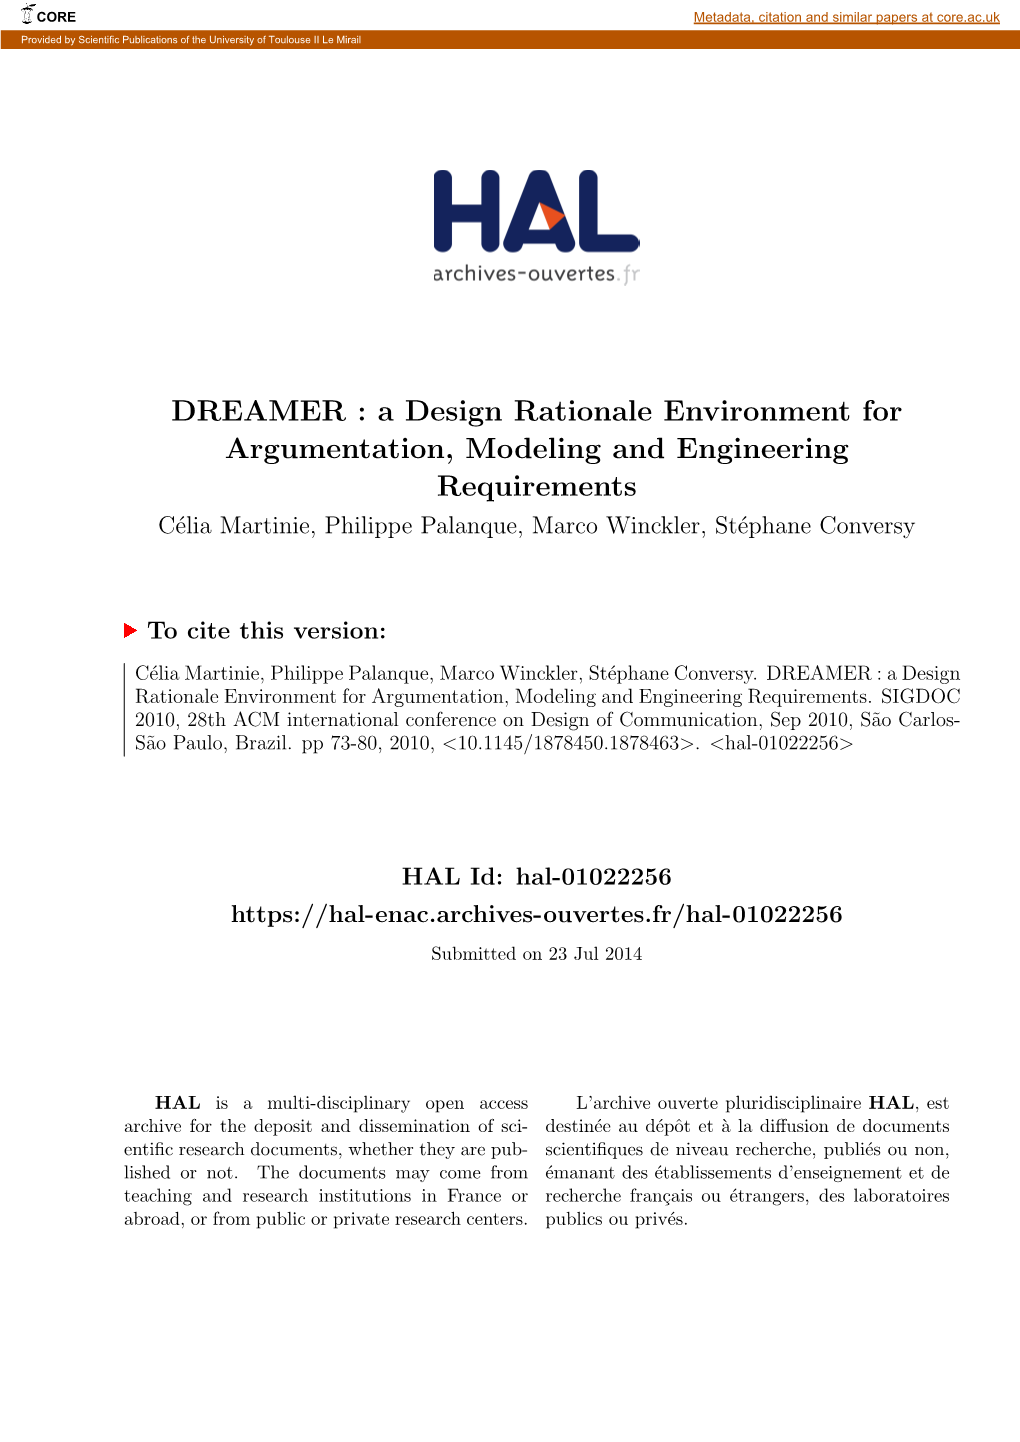 A Design Rationale Environment for Argumentation, Modeling and Engineering Requirements C´Eliamartinie, Philippe Palanque, Marco Winckler, St´Ephaneconversy